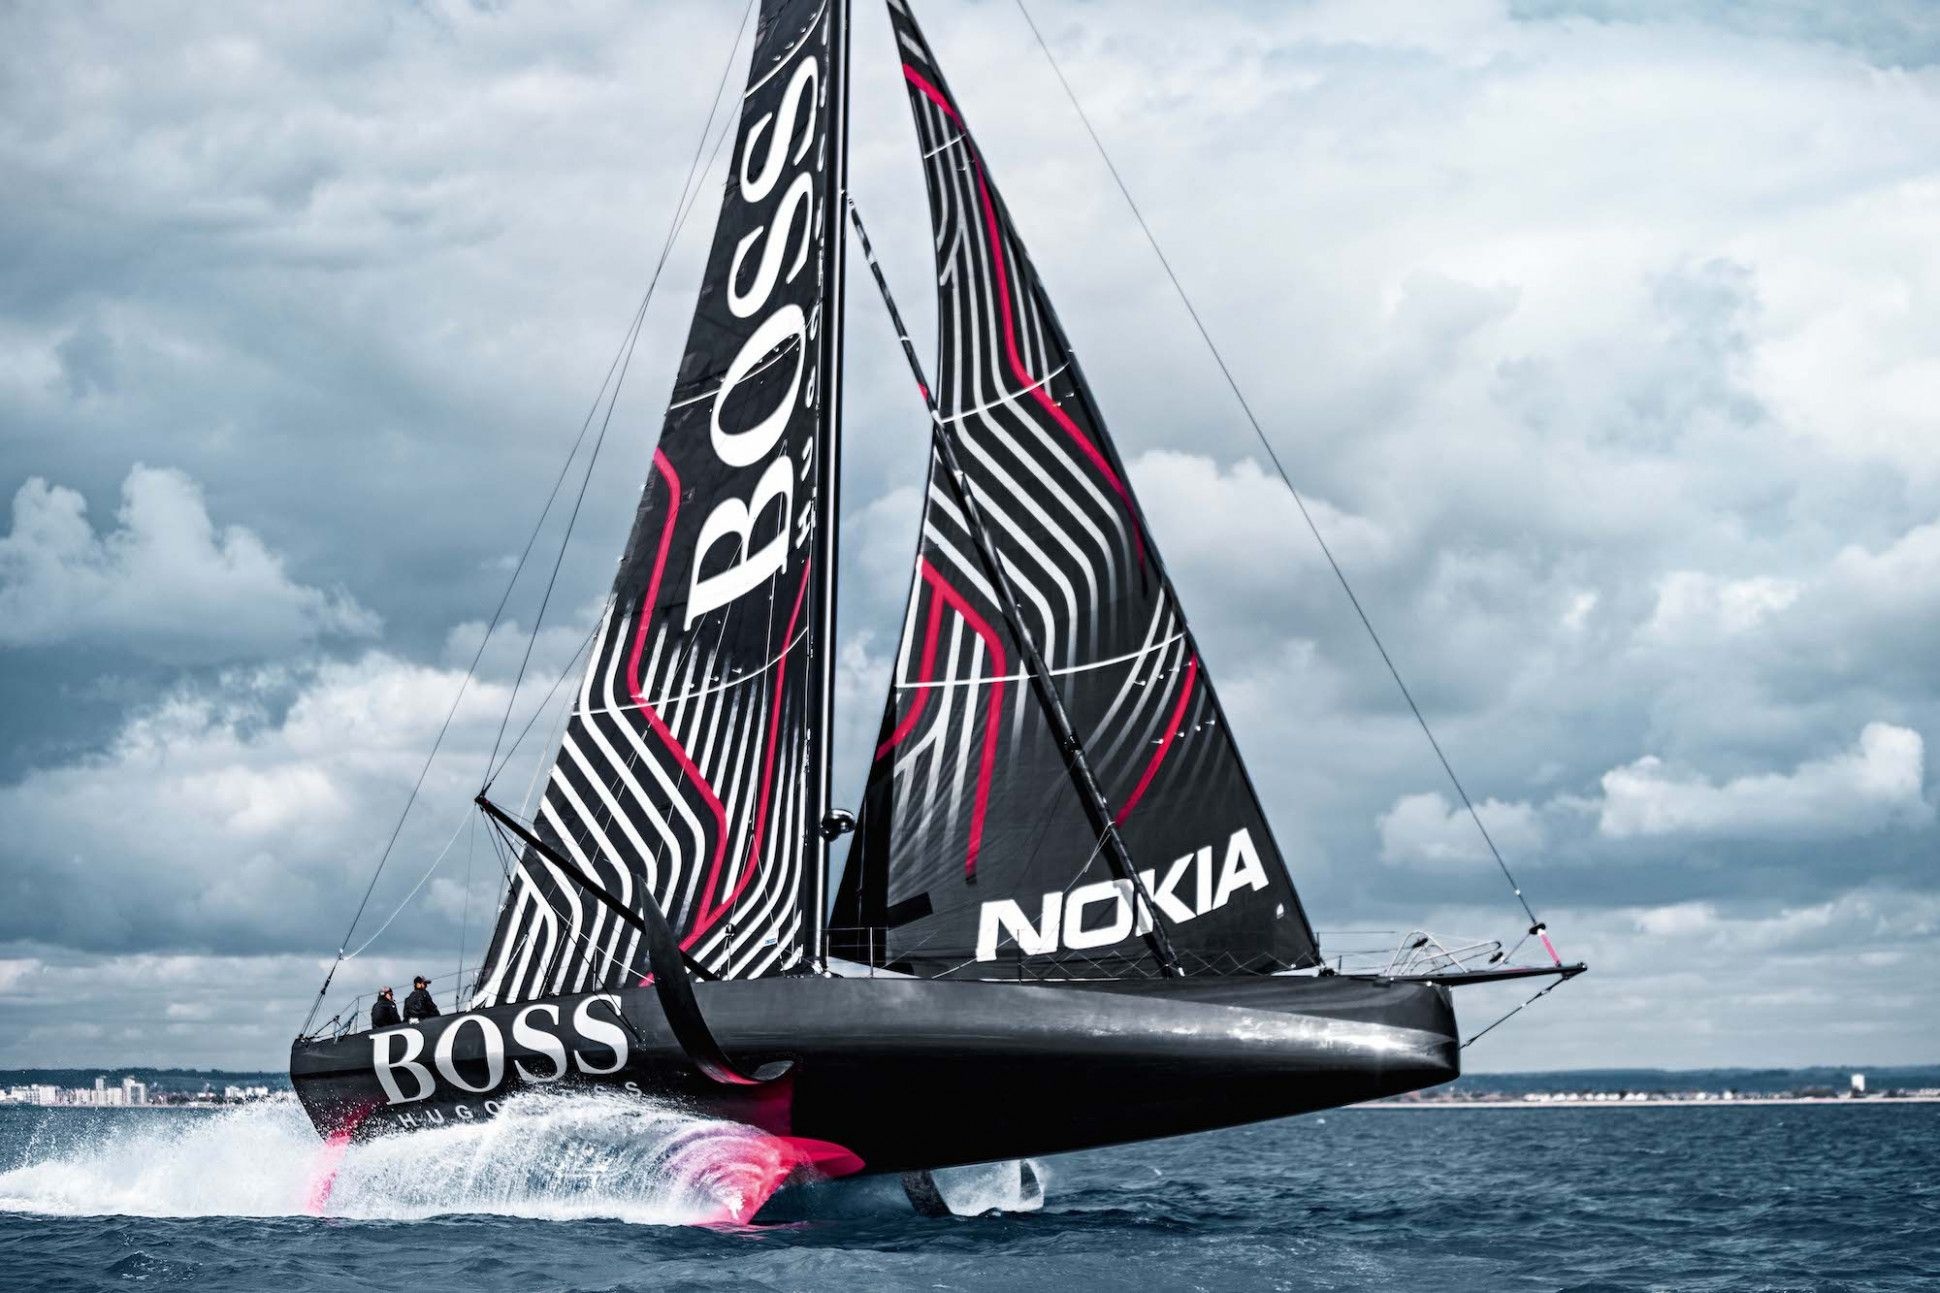 Yacht Racing: Volvo Yacht Race 2020, A sport reserved for large sailboats, Sailboats competition. 1940x1300 HD Wallpaper.